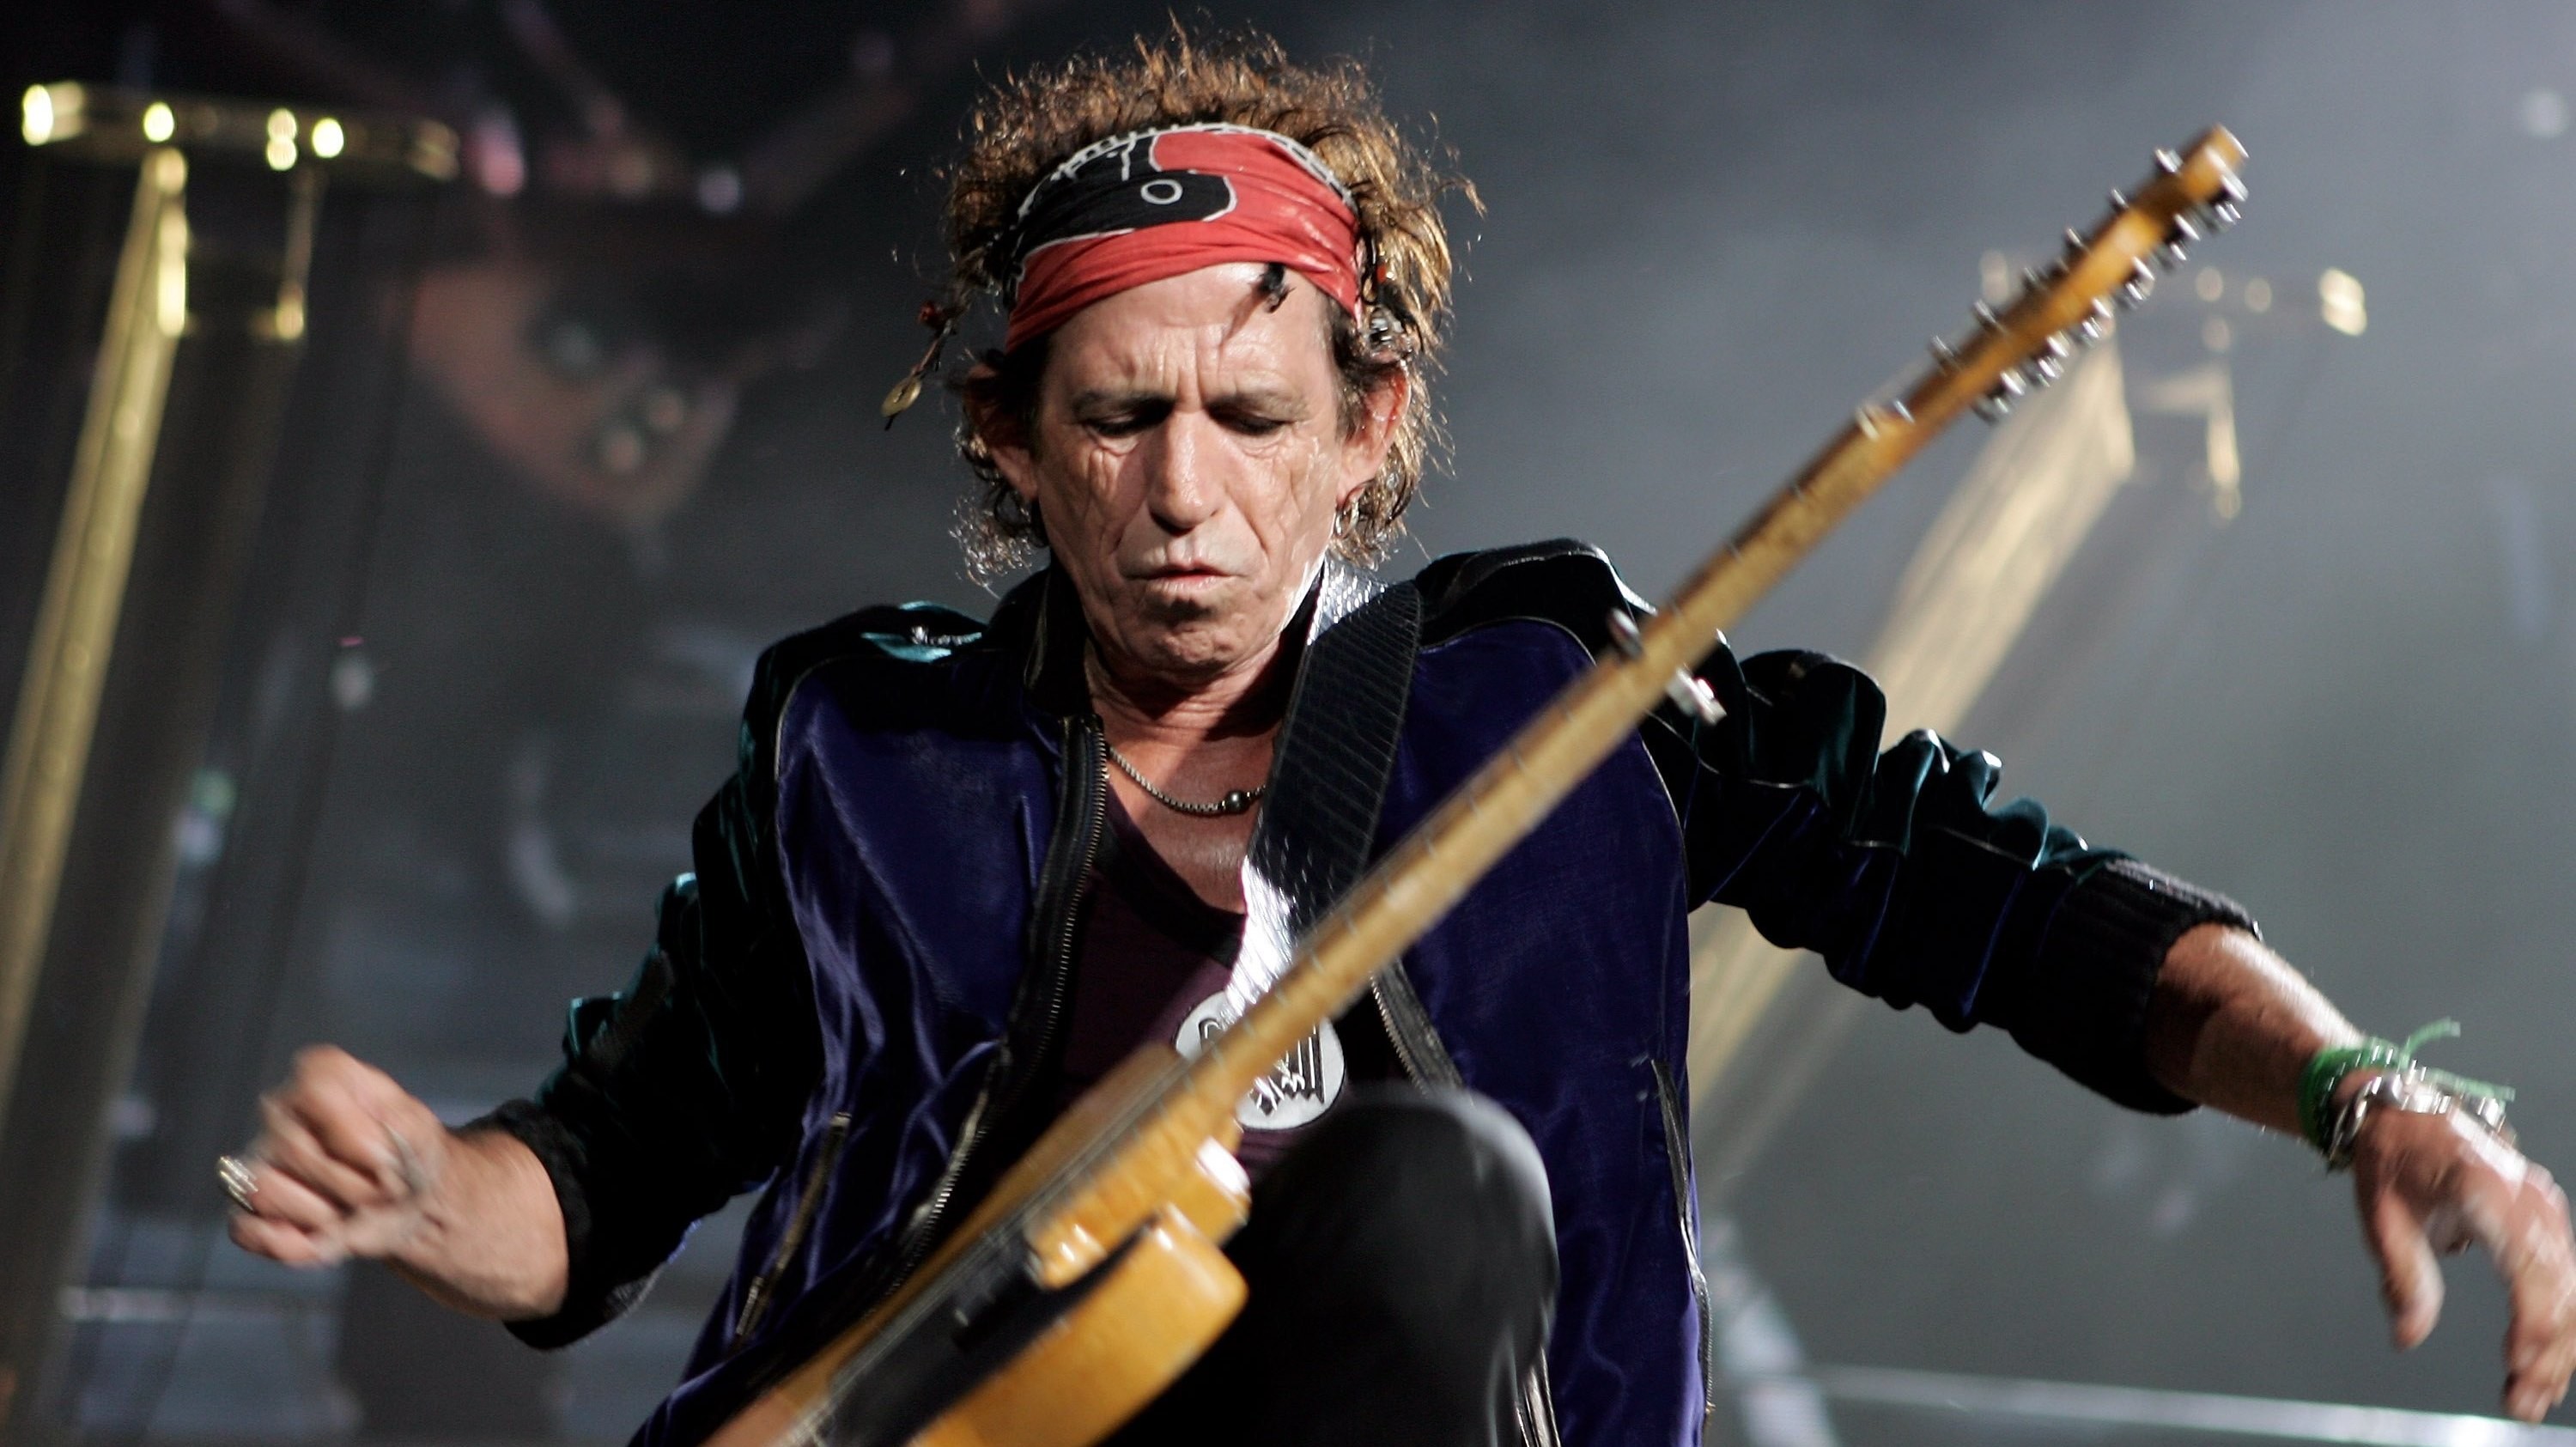 3000x1685 Keith Richards: 'These Riffs Were Built To Last A Lifetime' | KERA News